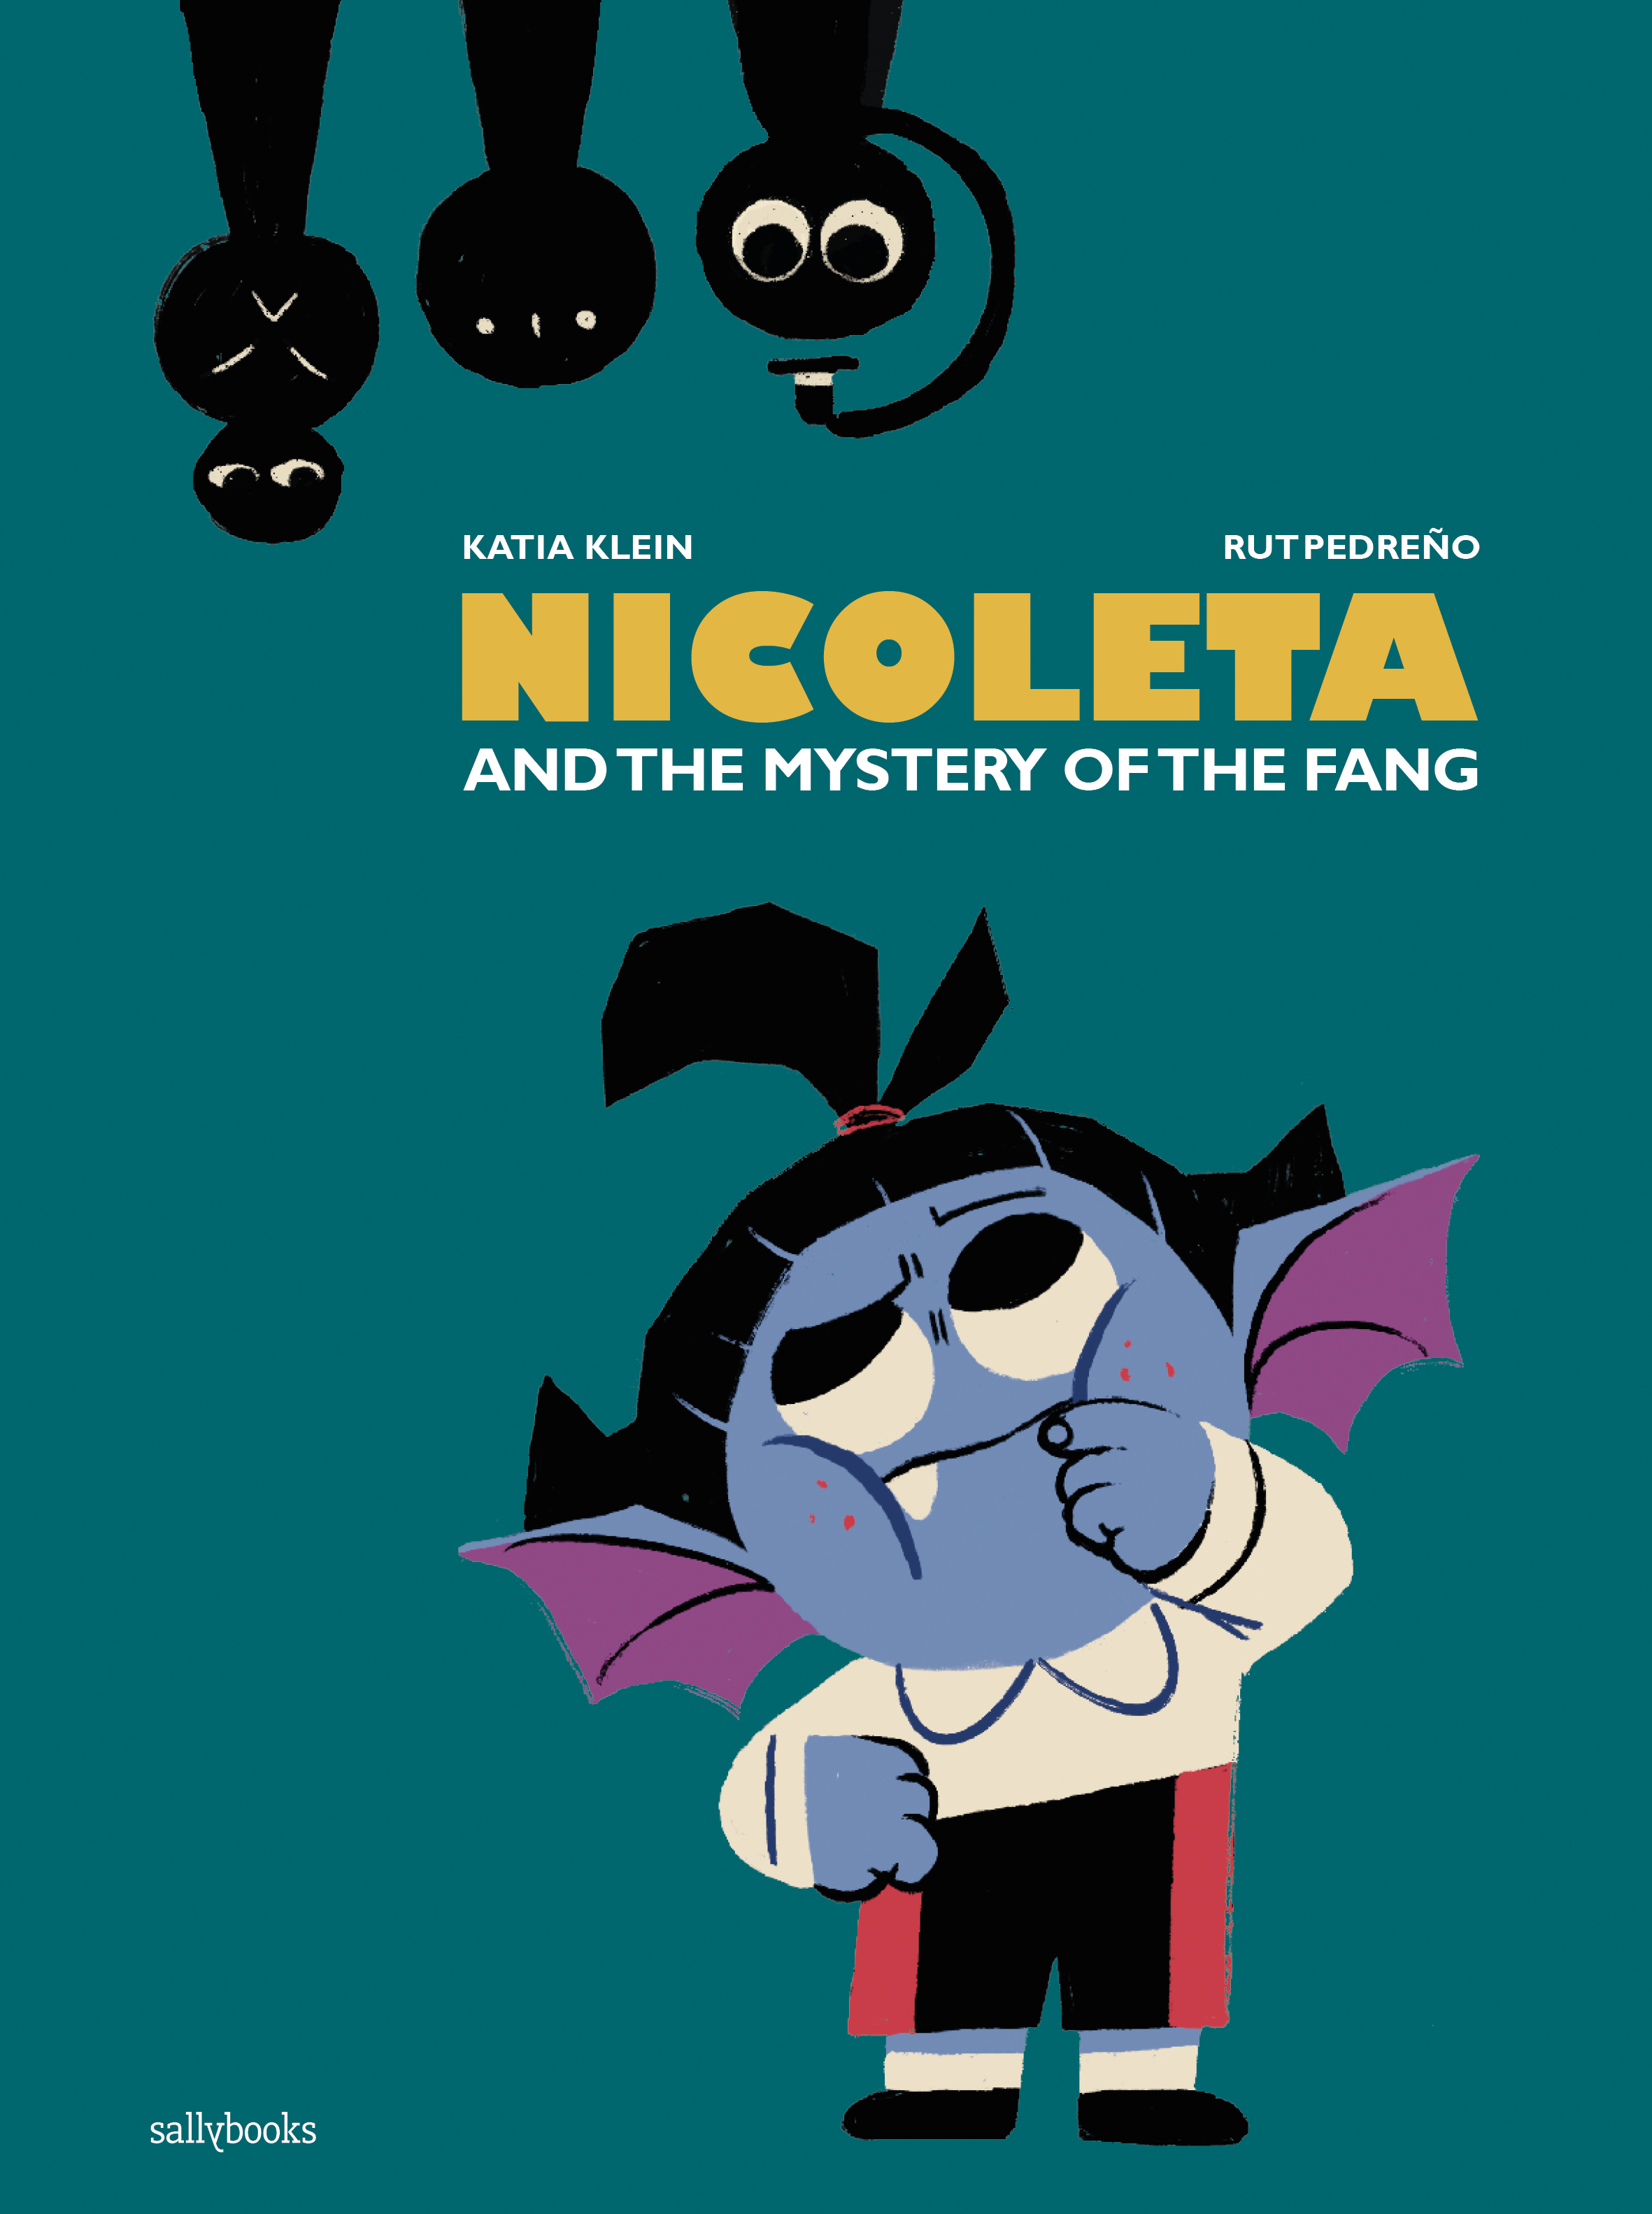 NICOLETA AND THE MYSTERY OF THE FANG